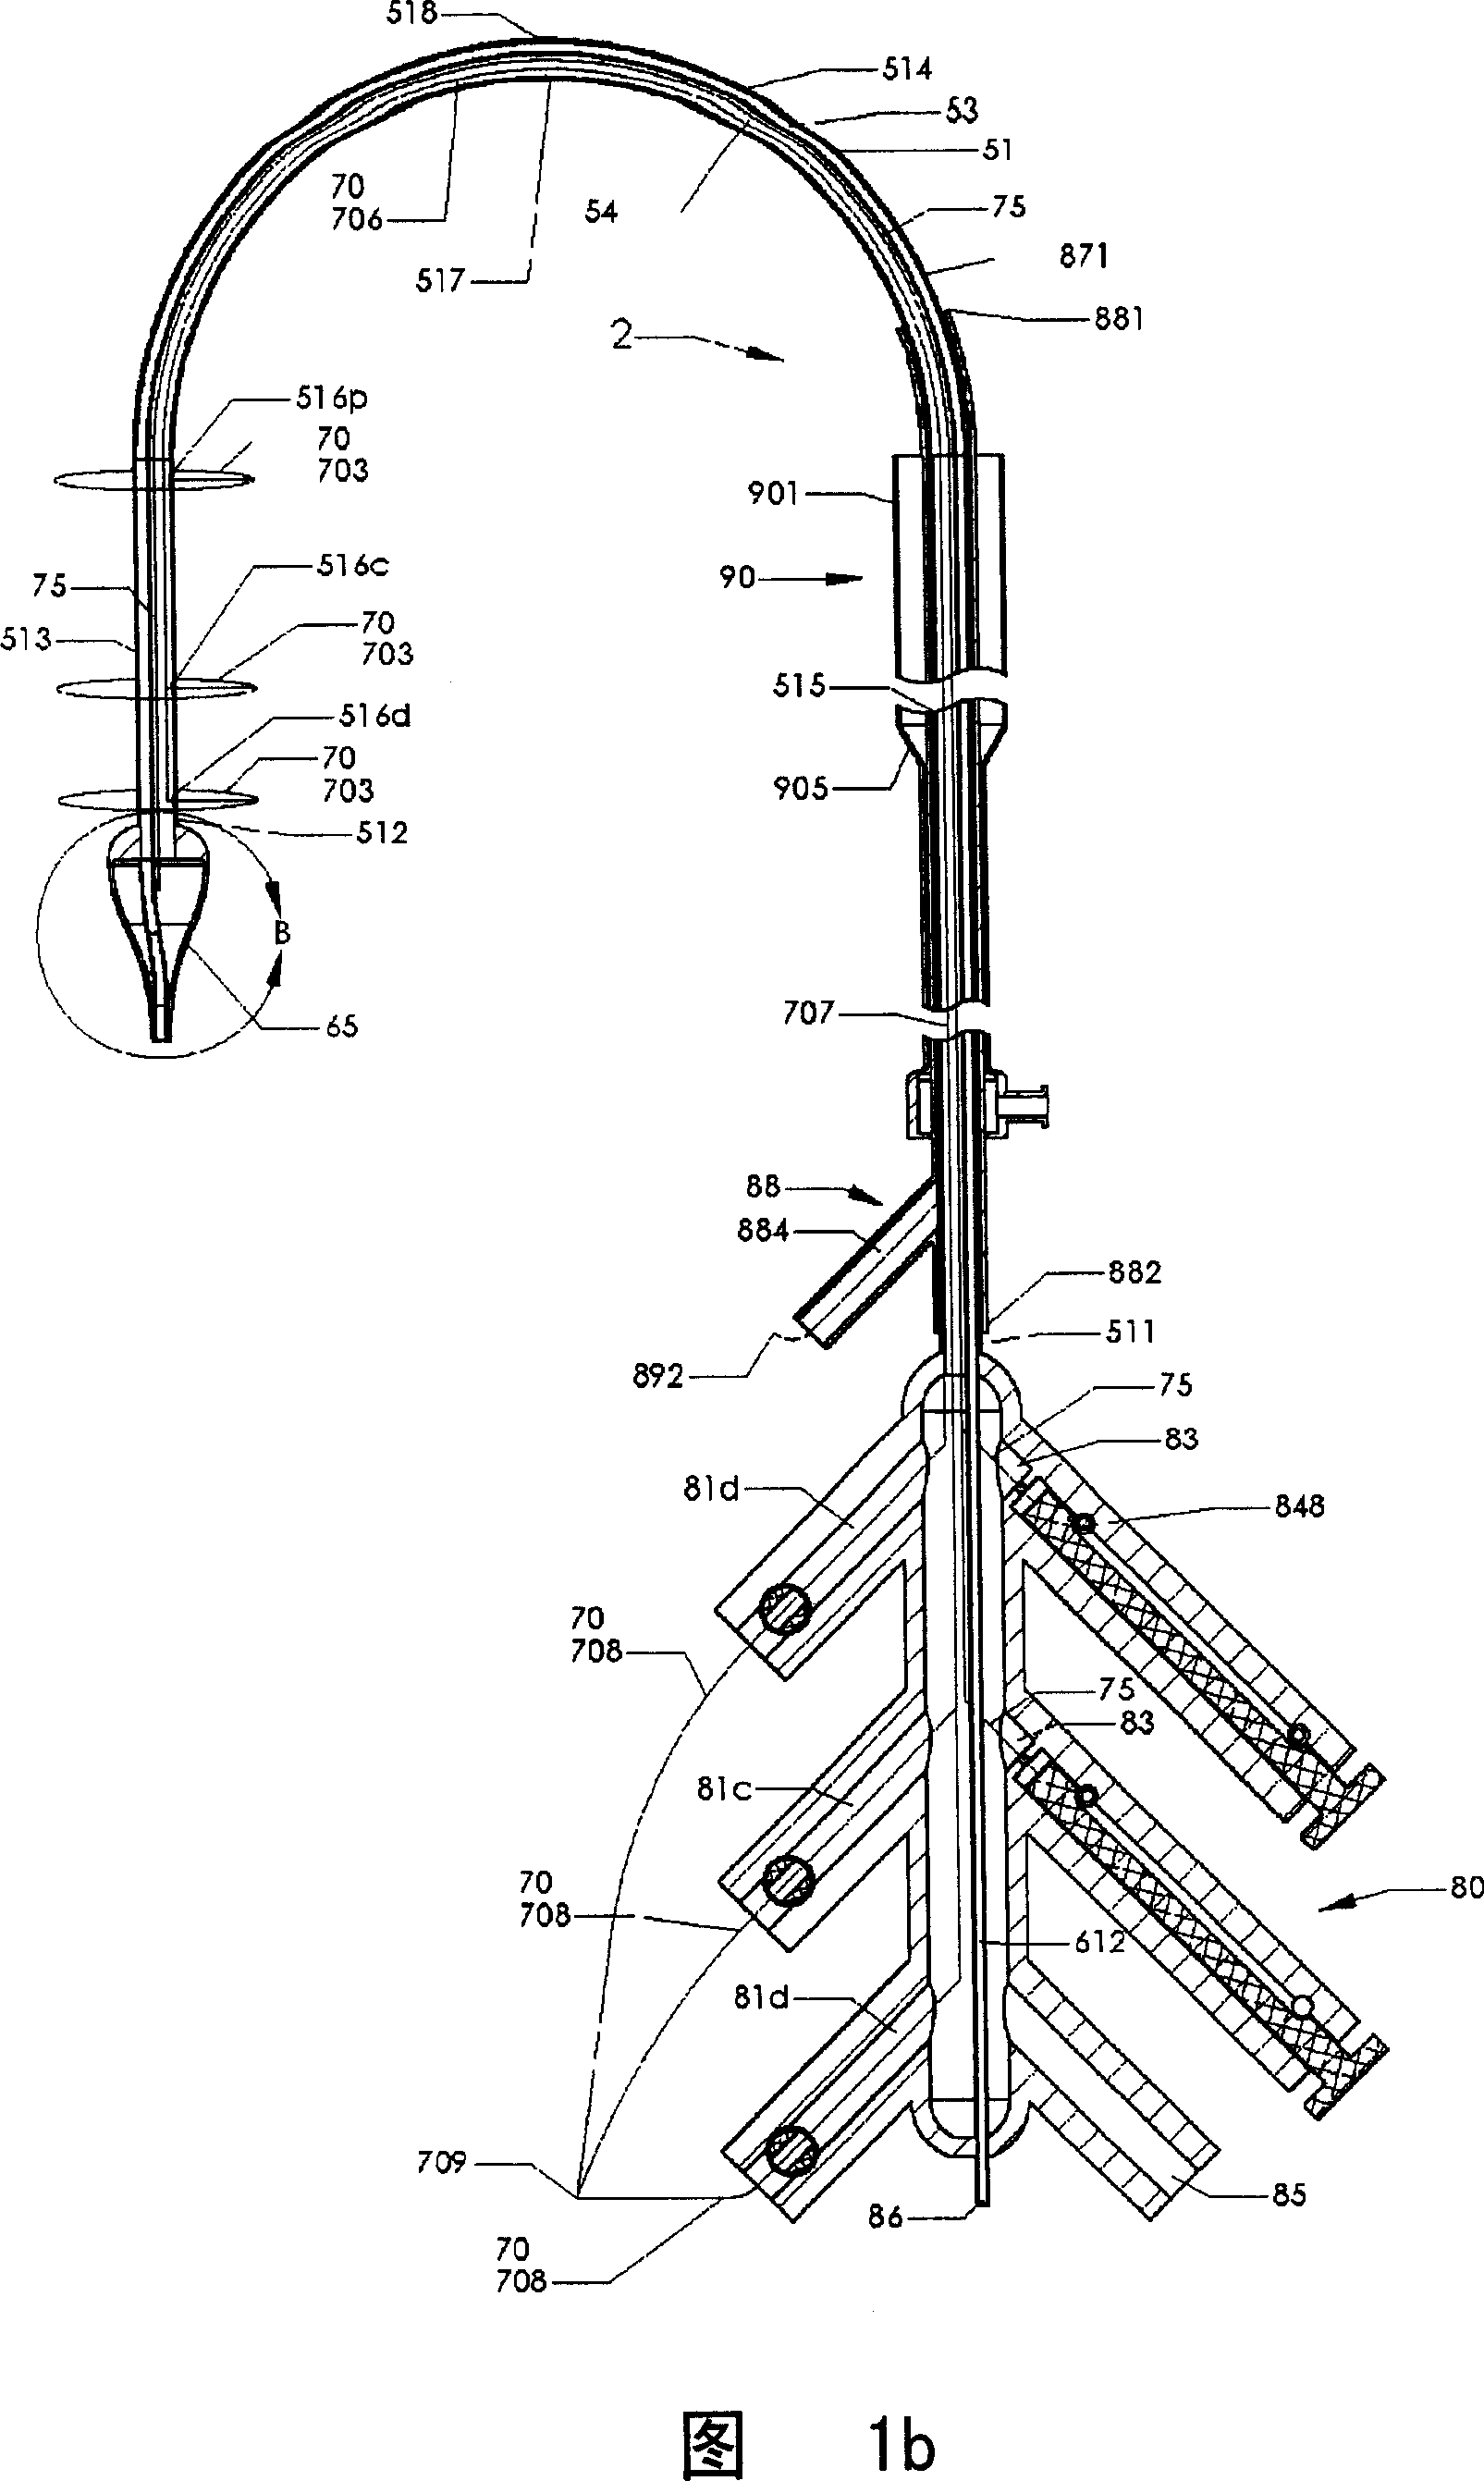 Apparatus for delivering artificial heart stent valve